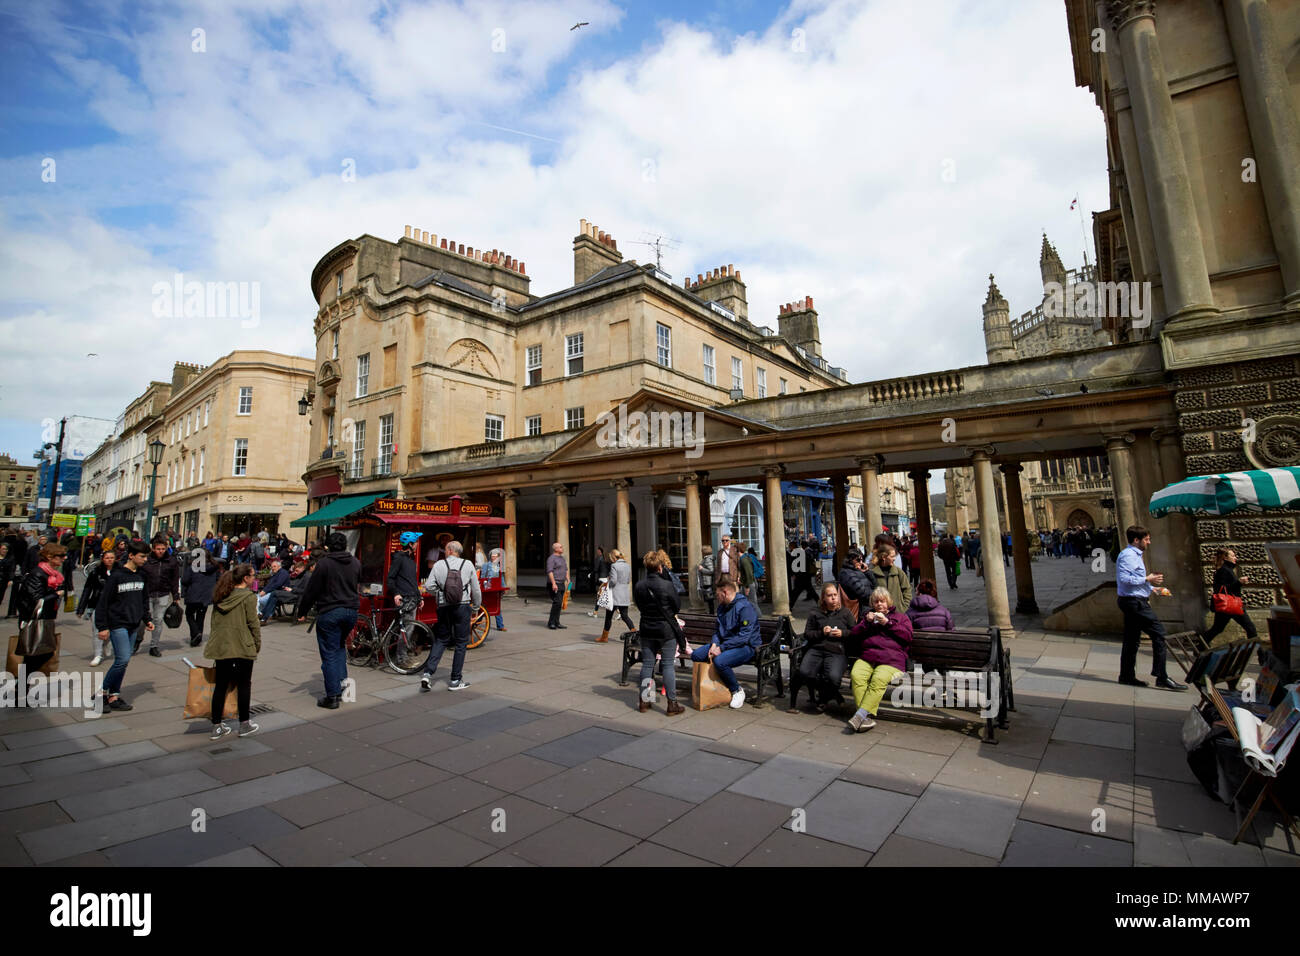 Stall street shopping area and north colonnade du complexe des bains romains baignoire England UK Banque D'Images